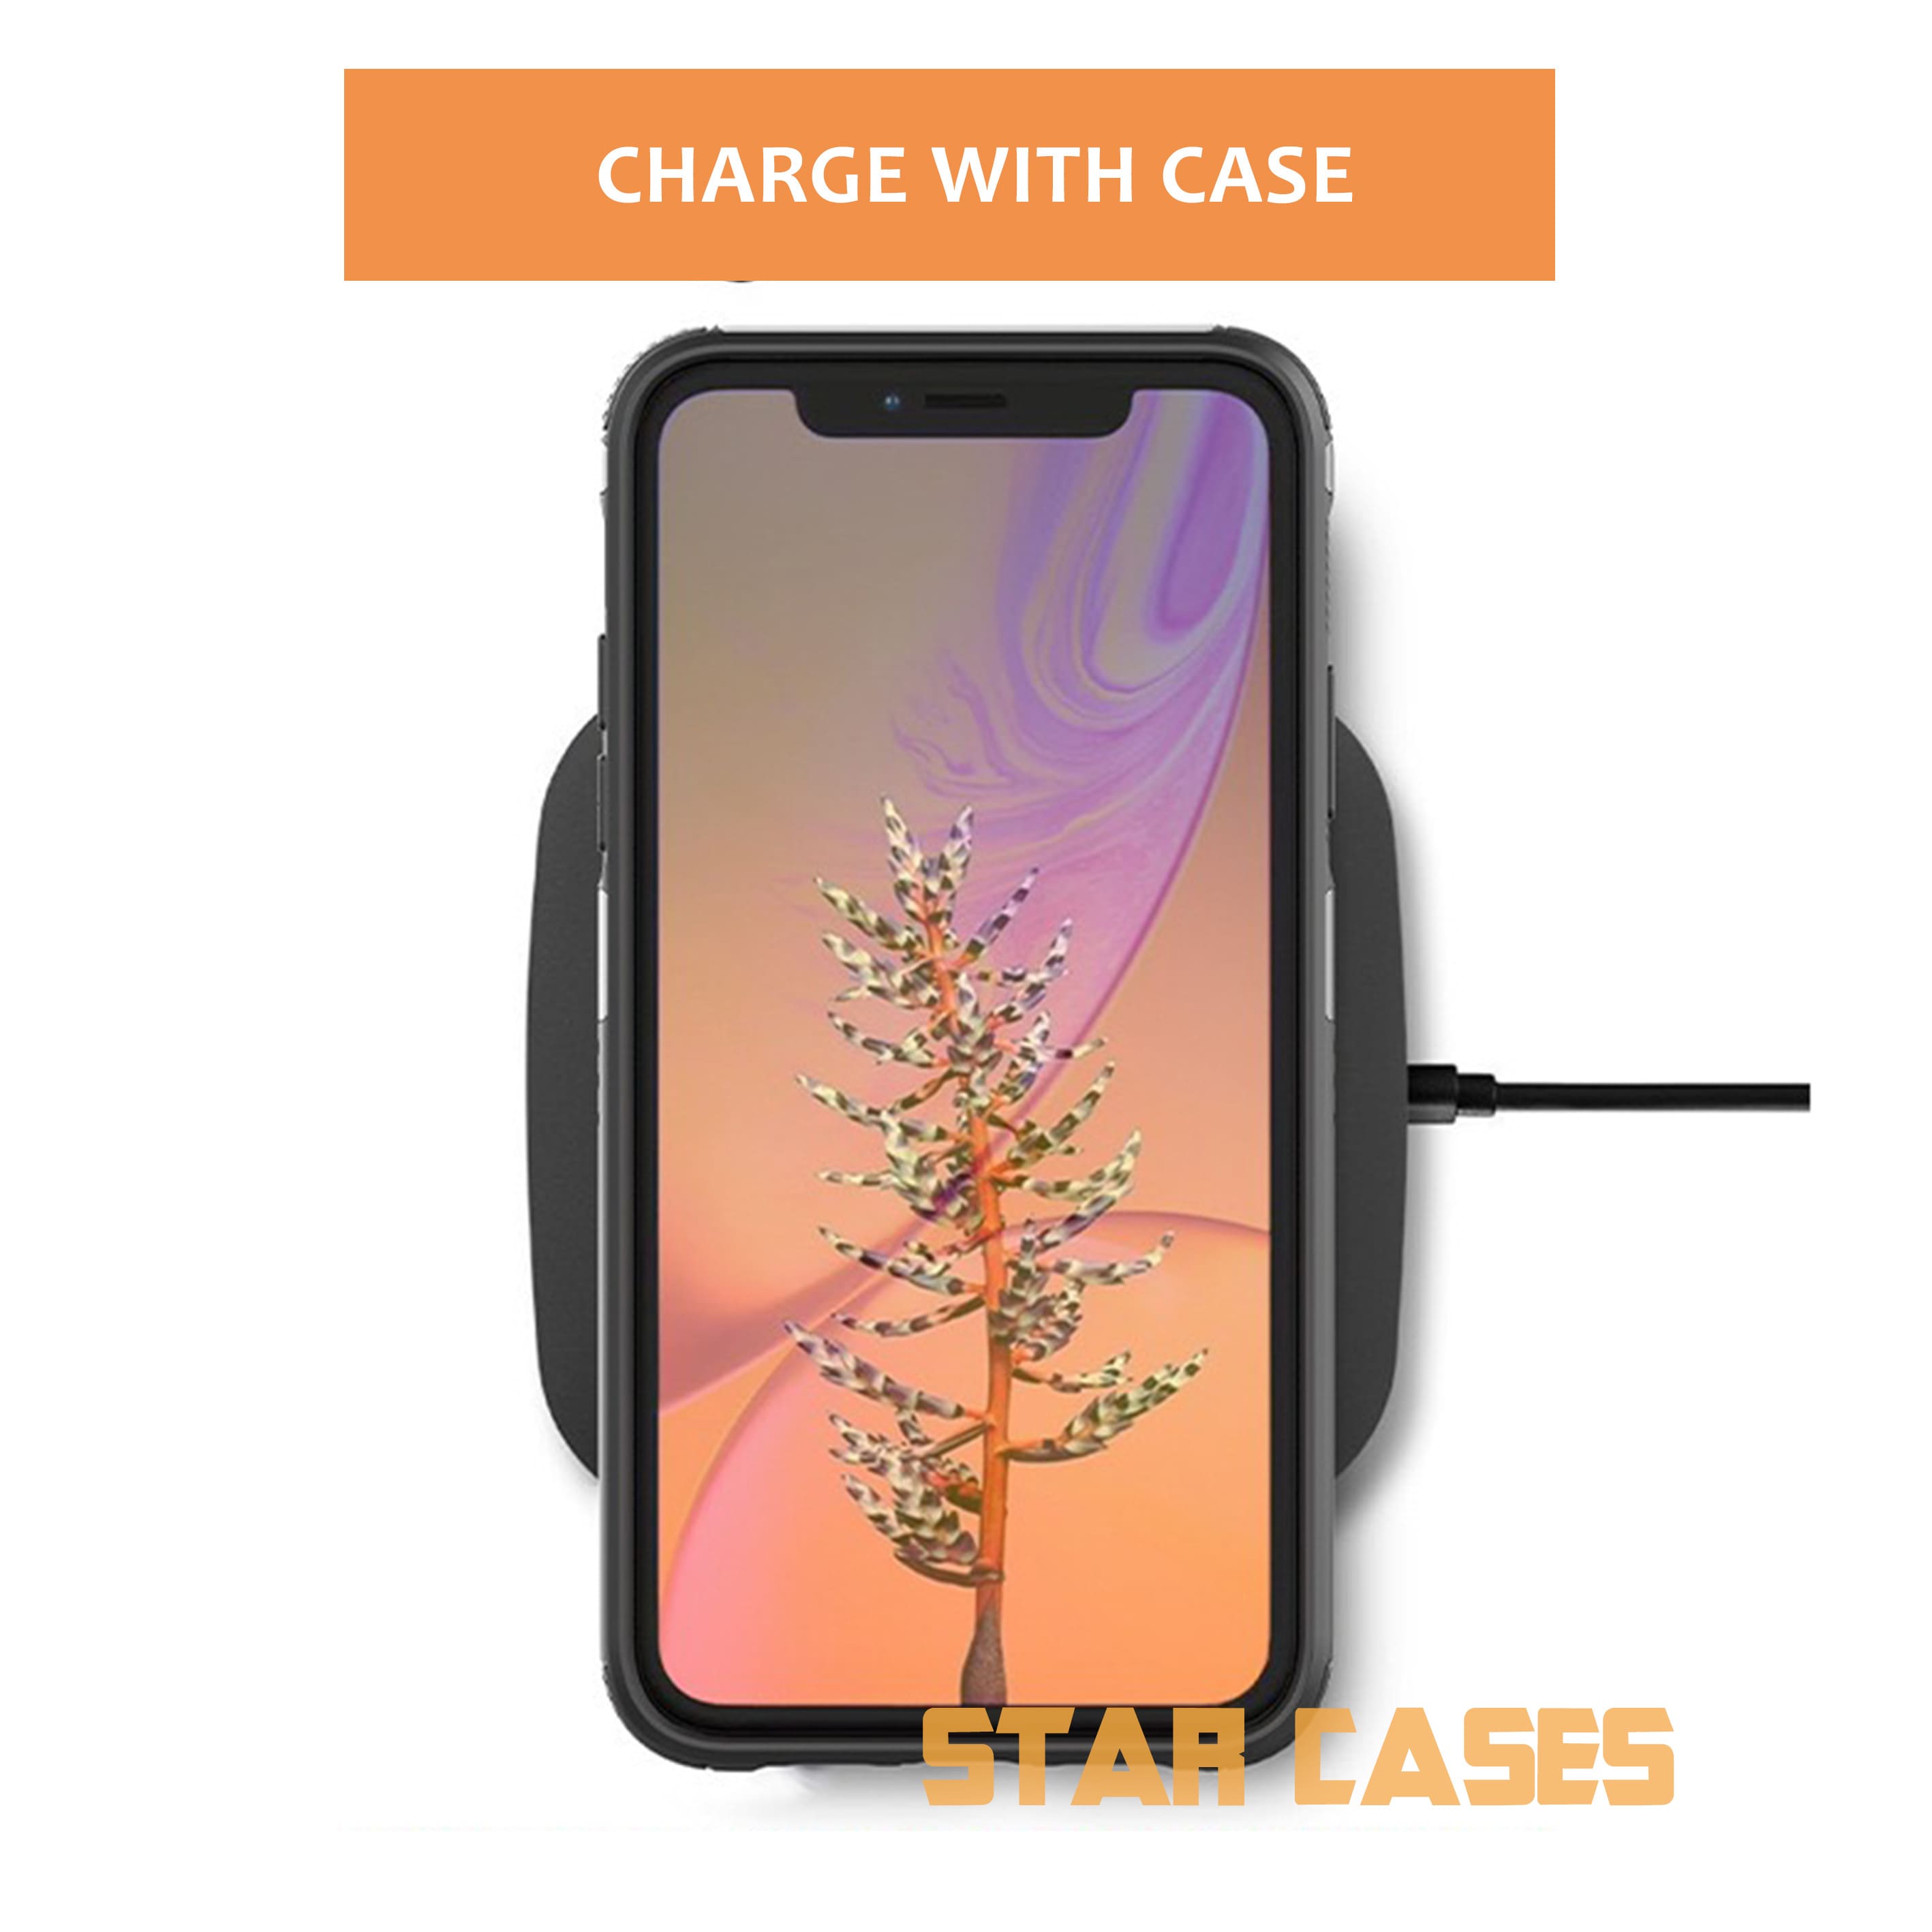 iPhone Xr Armour Shockproof Case